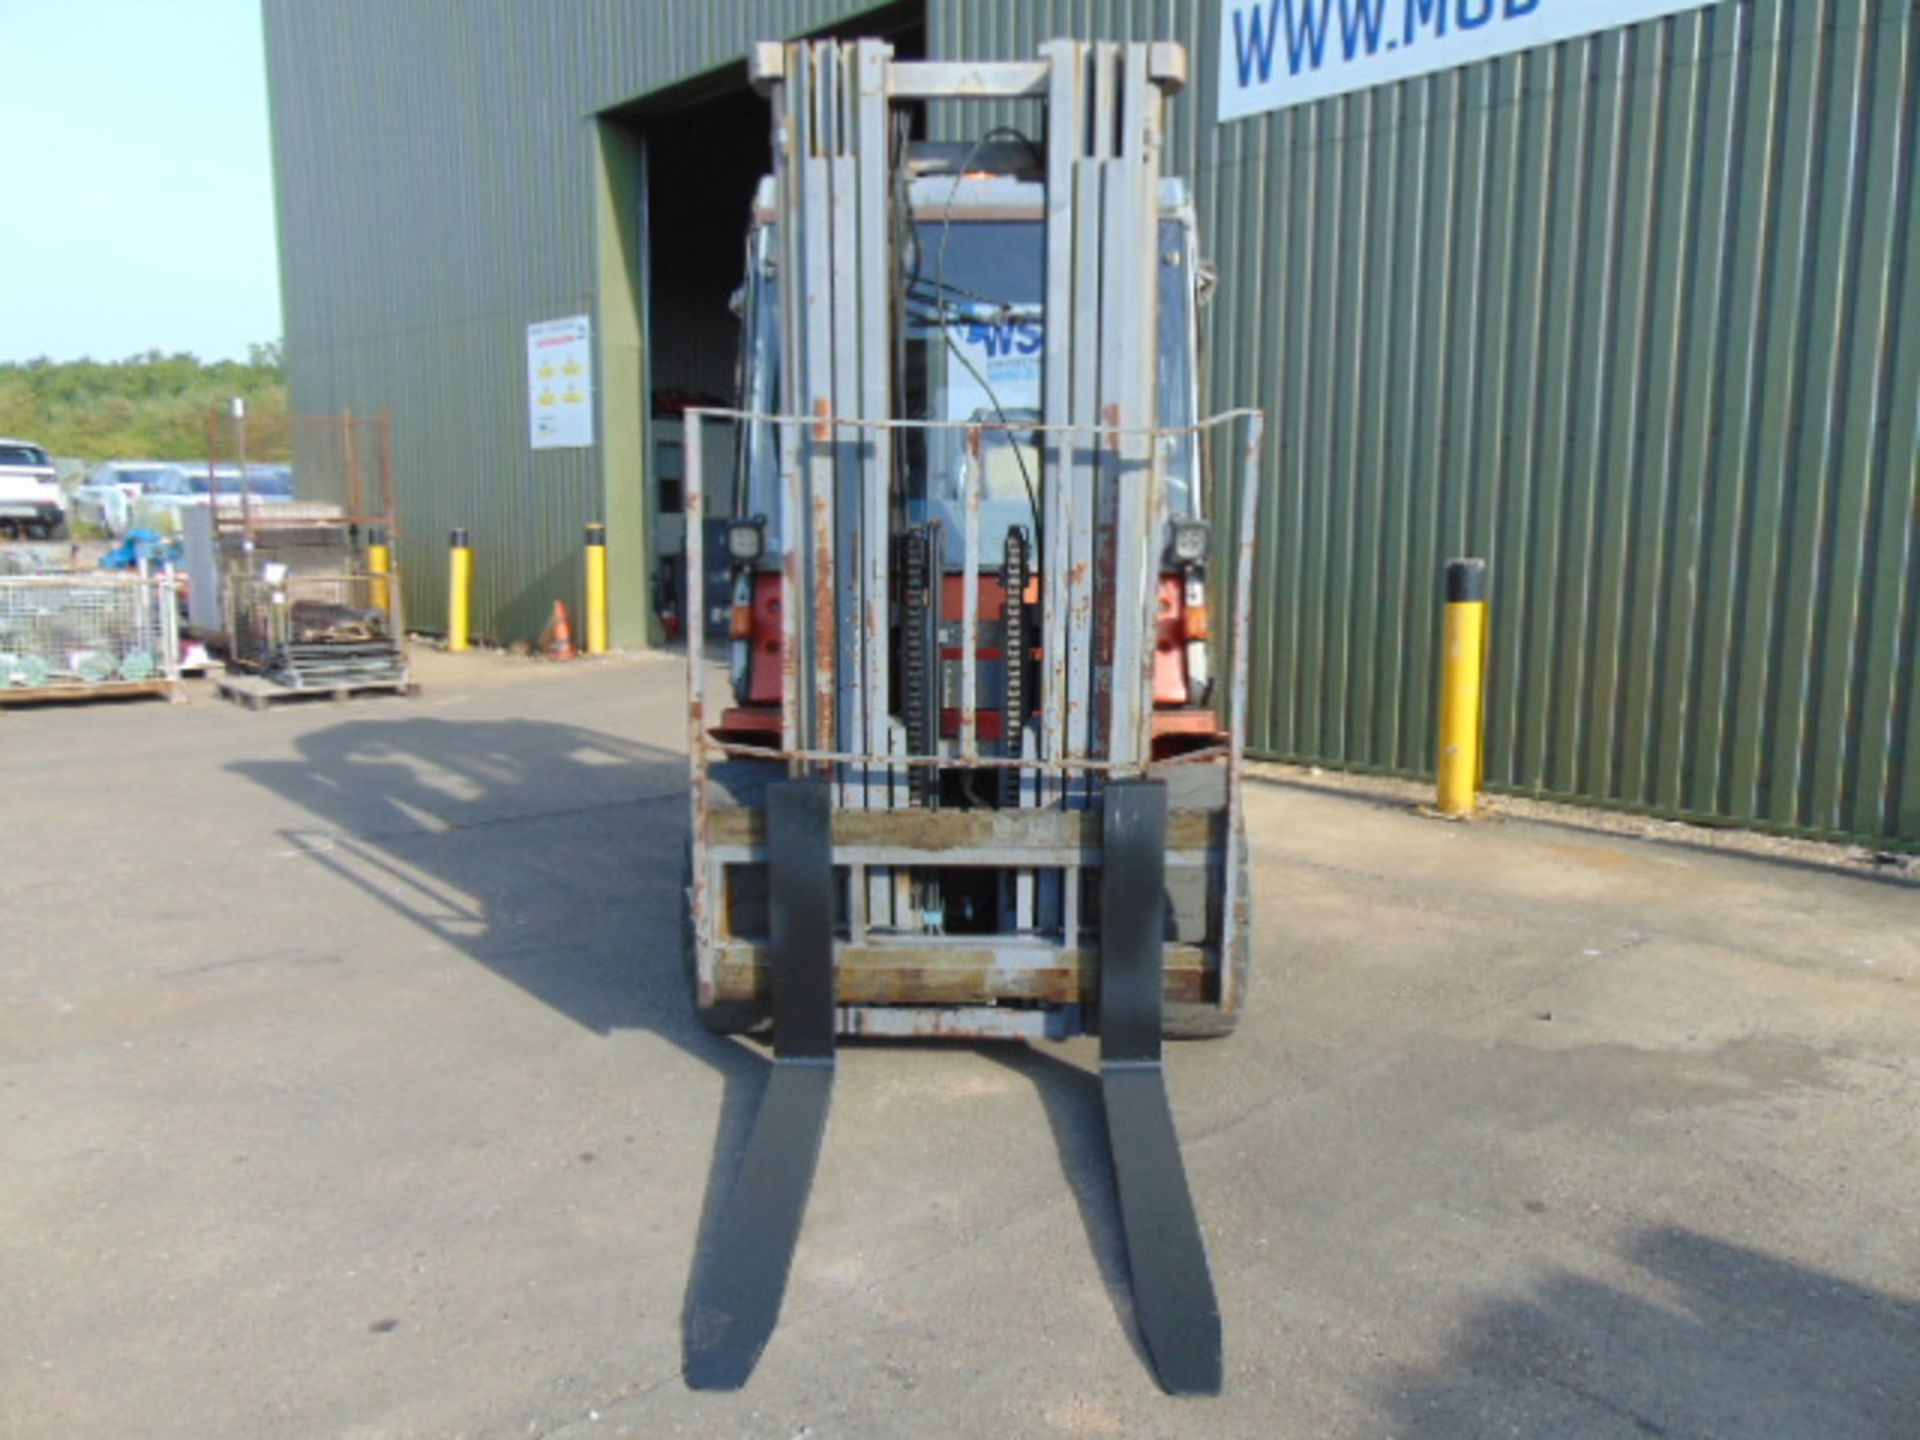 2003 BT Rolatruc 5 Ton Counter Balance Diesel Forklift c/w 3 Stage Mast Side Shift ONLY 1,544 HOURS! - Image 2 of 25